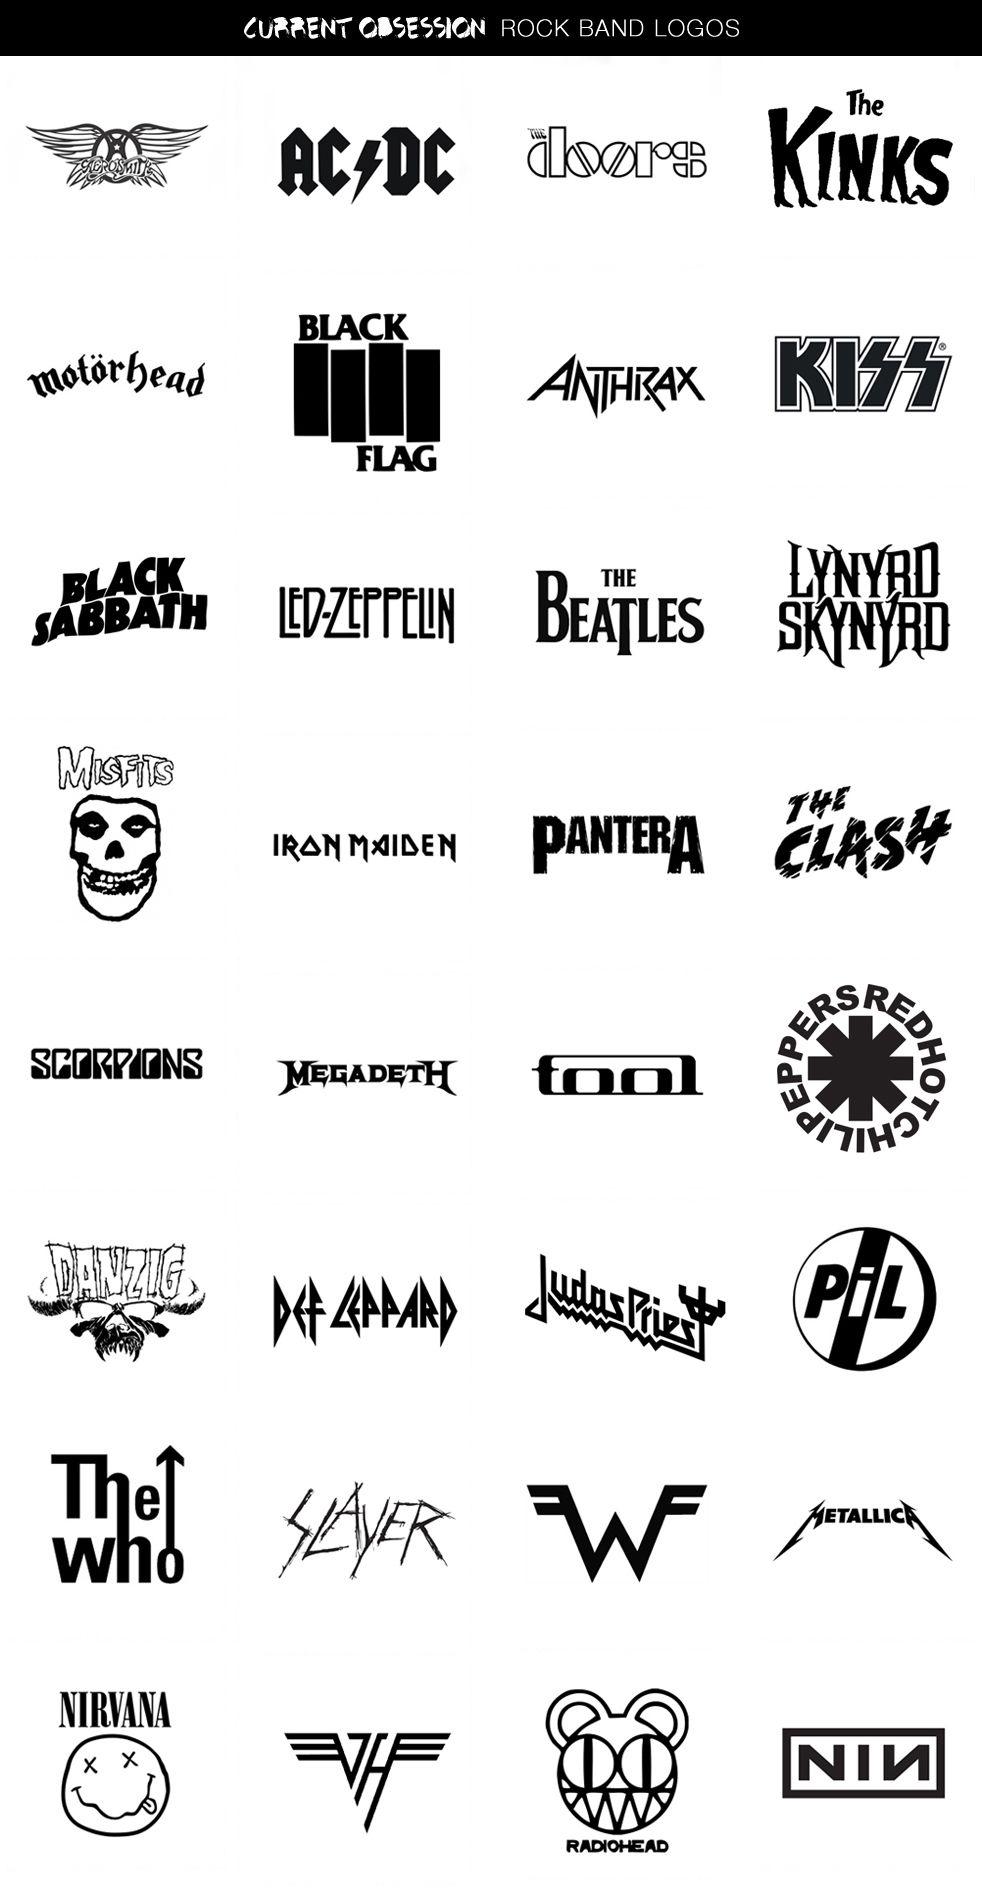 Classic Rock Band Logo - Current Obsession: Rock Band Logos